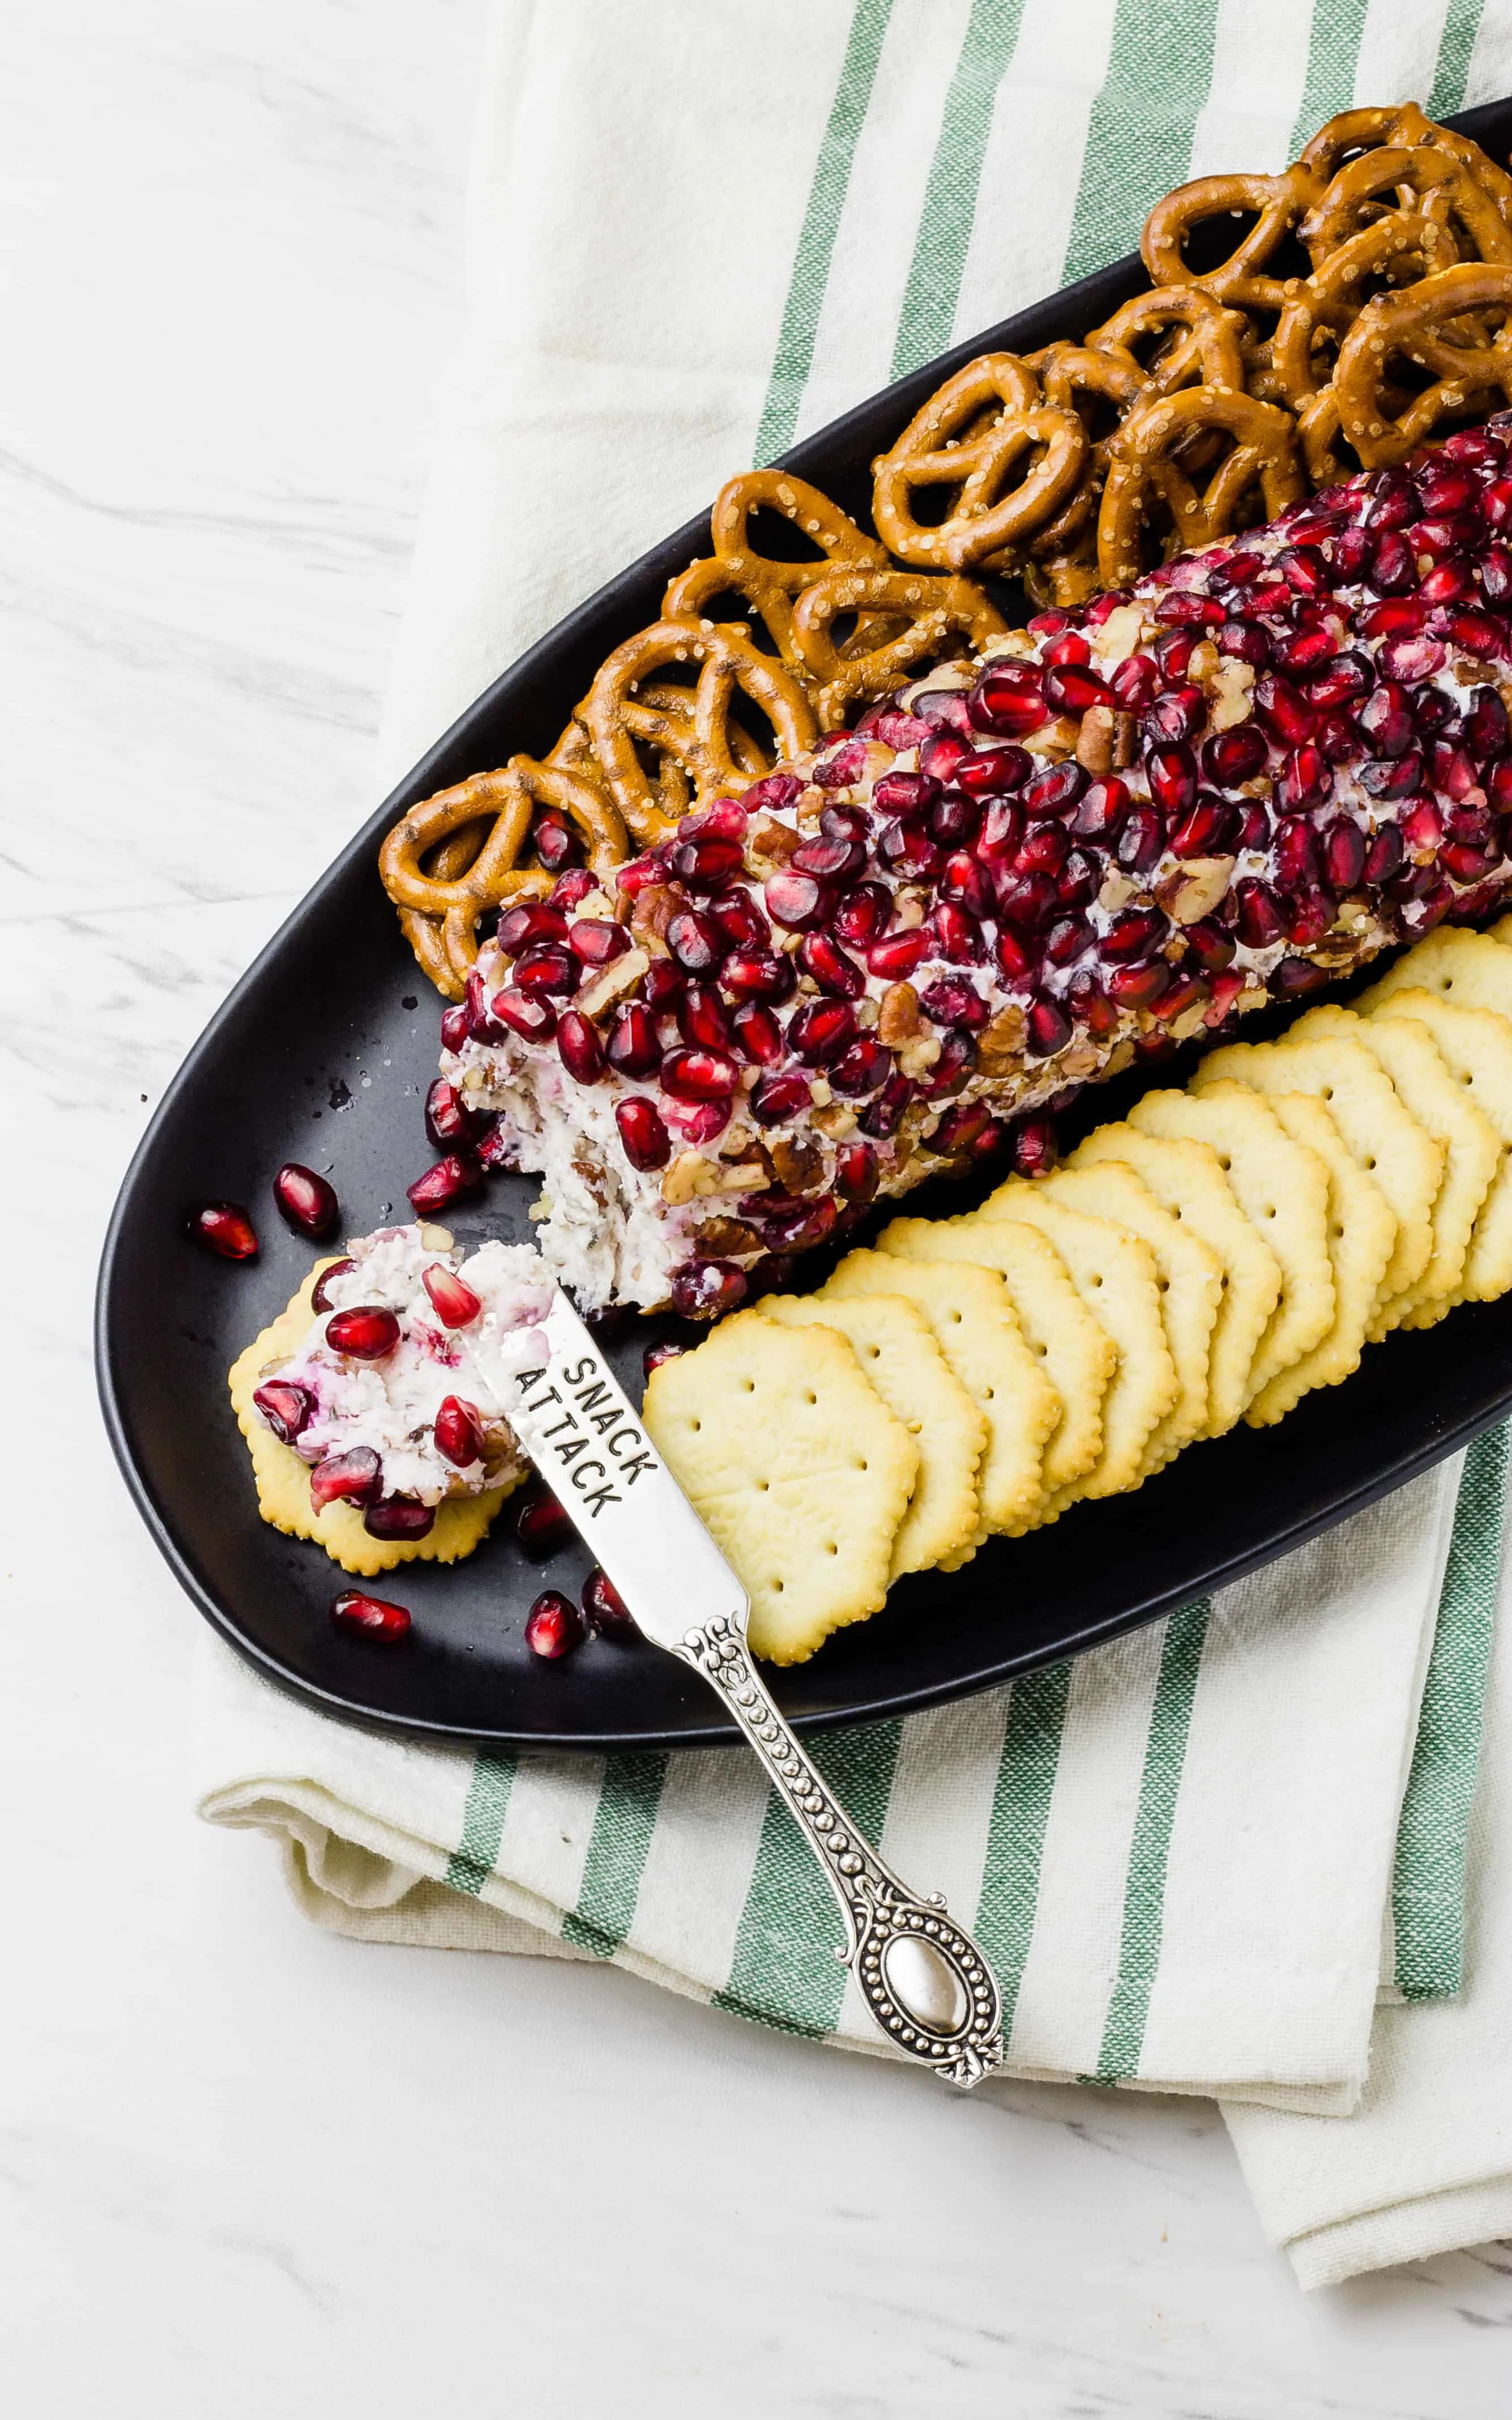 Get in the holiday spirit with spirits! Drunken Goat Cheese Log with Pomegranates | Take Two Tapas | #Pomegranates #Arils #Pecans #CheeseLog #GoatCheese #Vodka #Holidays